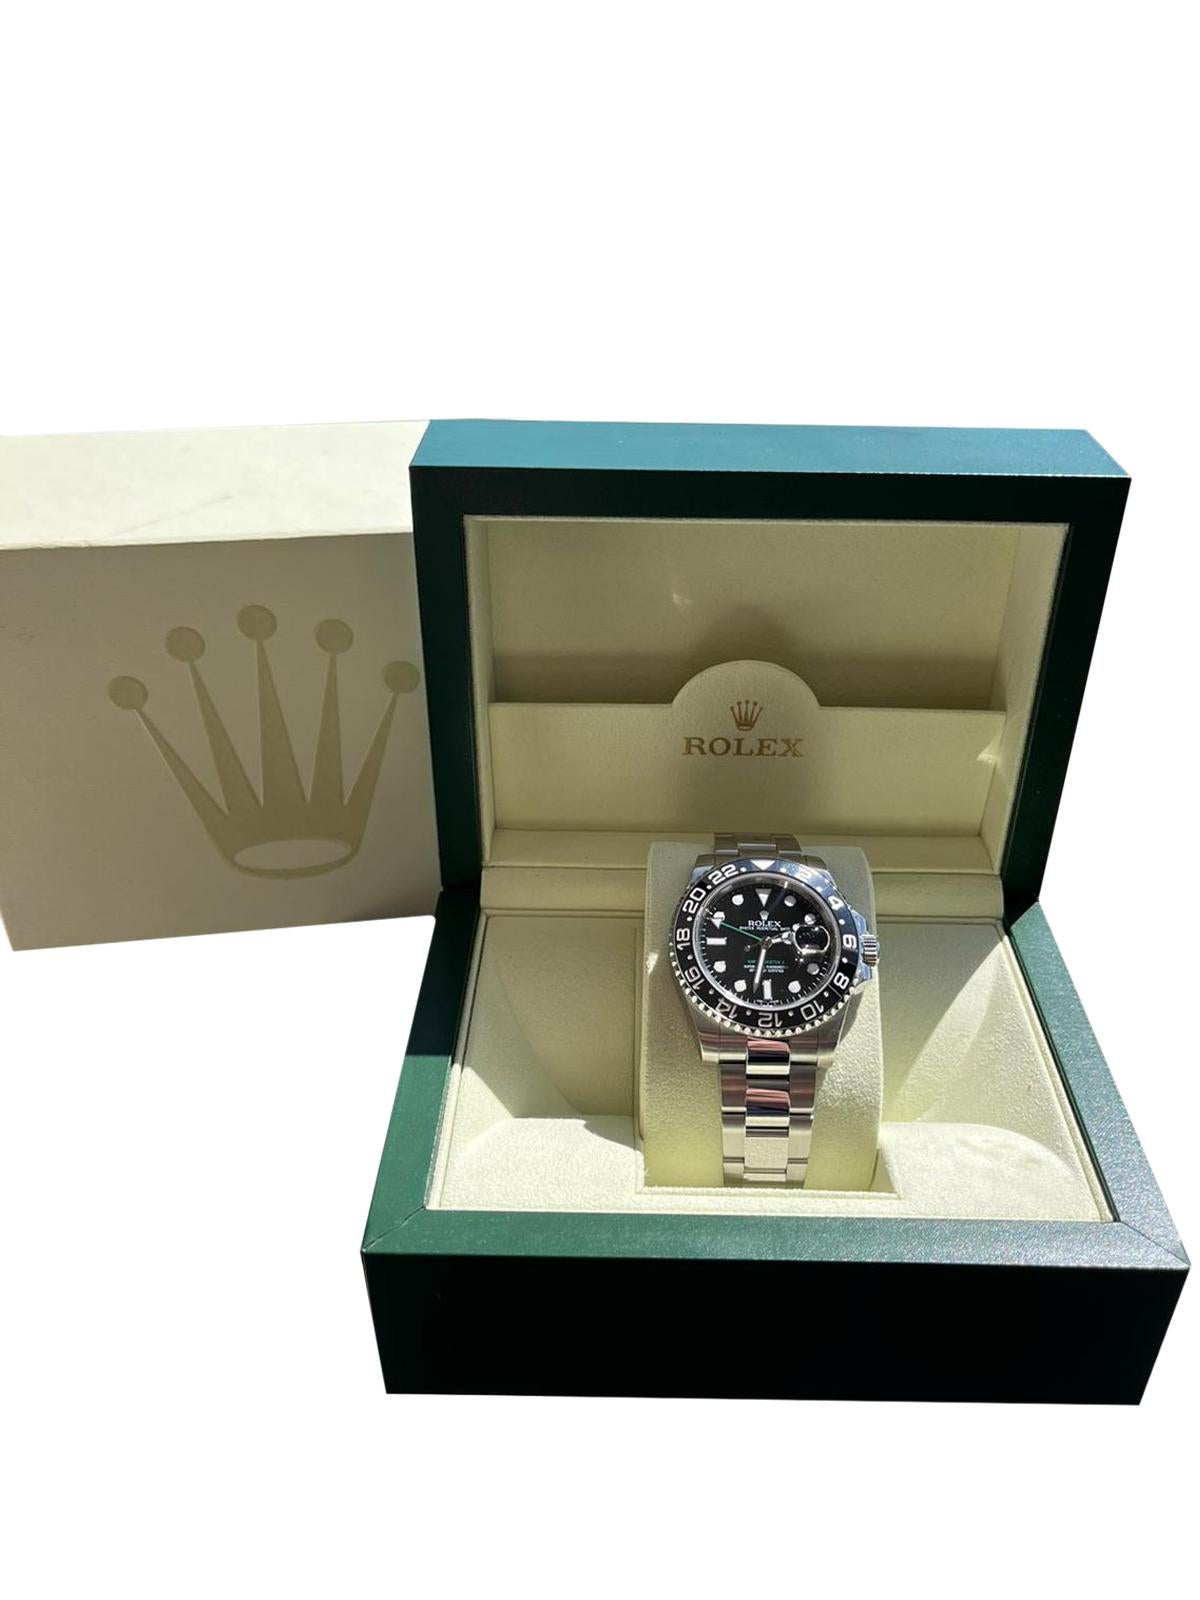 Rolex GMT-Master II 116710LN self-winding automatic watch features a 40mm stainless steel case surrounding a black dial on a stainless steel Oyster bracelet with a folding buckle. Functions include hours, minutes, seconds, dates, and GMT. This watch